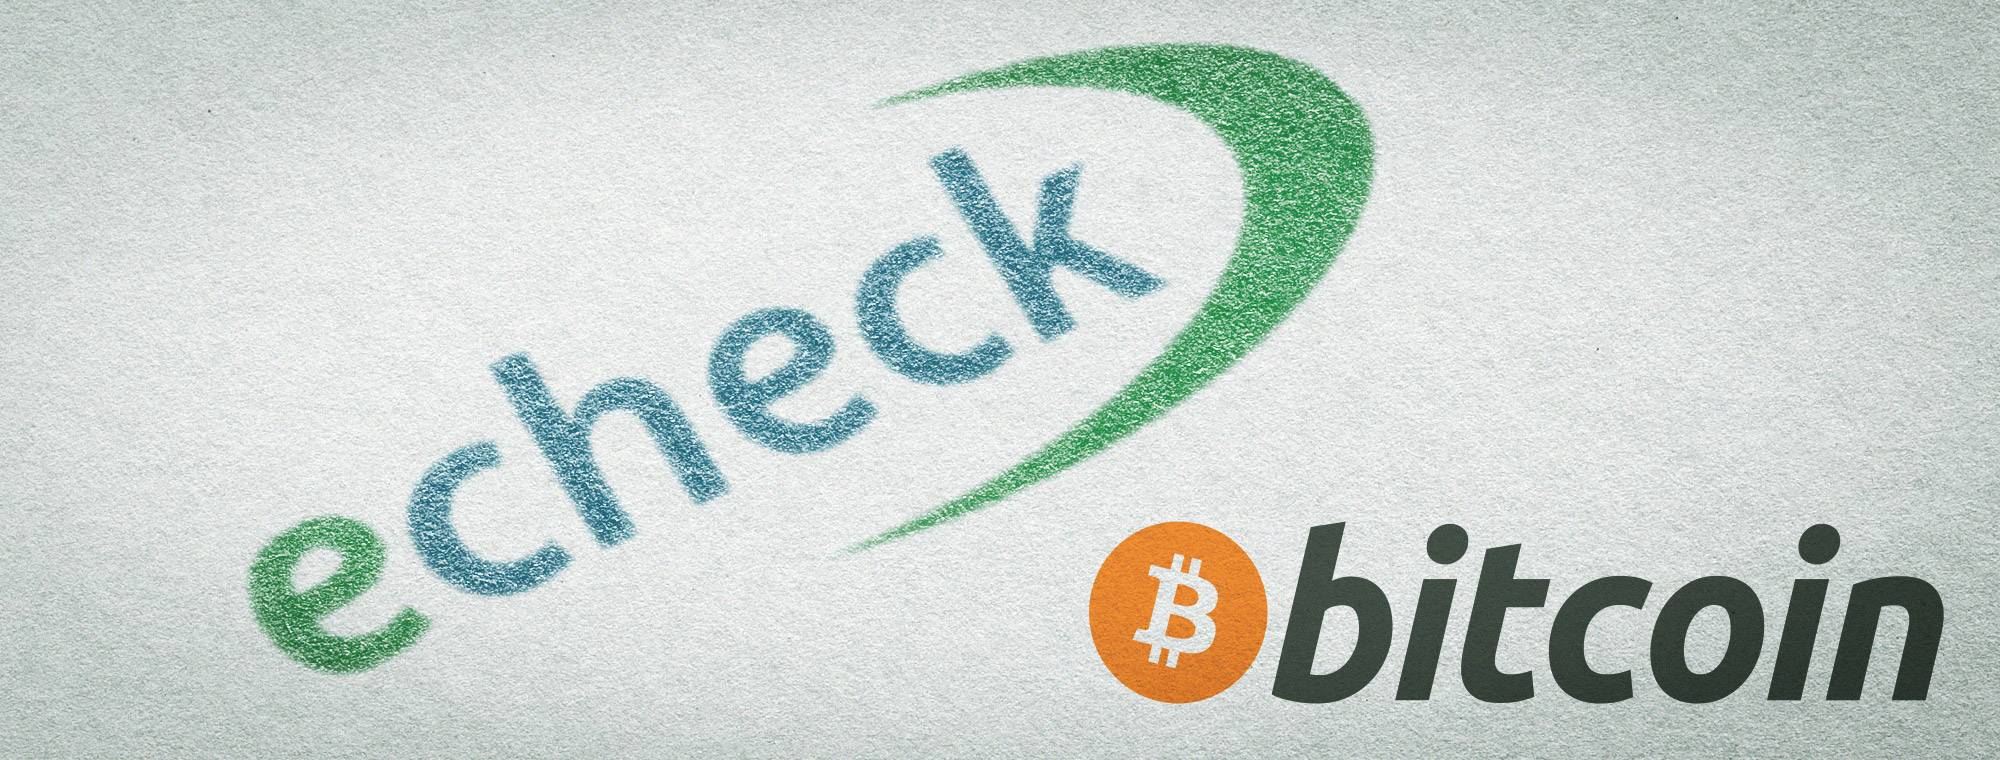 buy bitcoins with an echeck online check